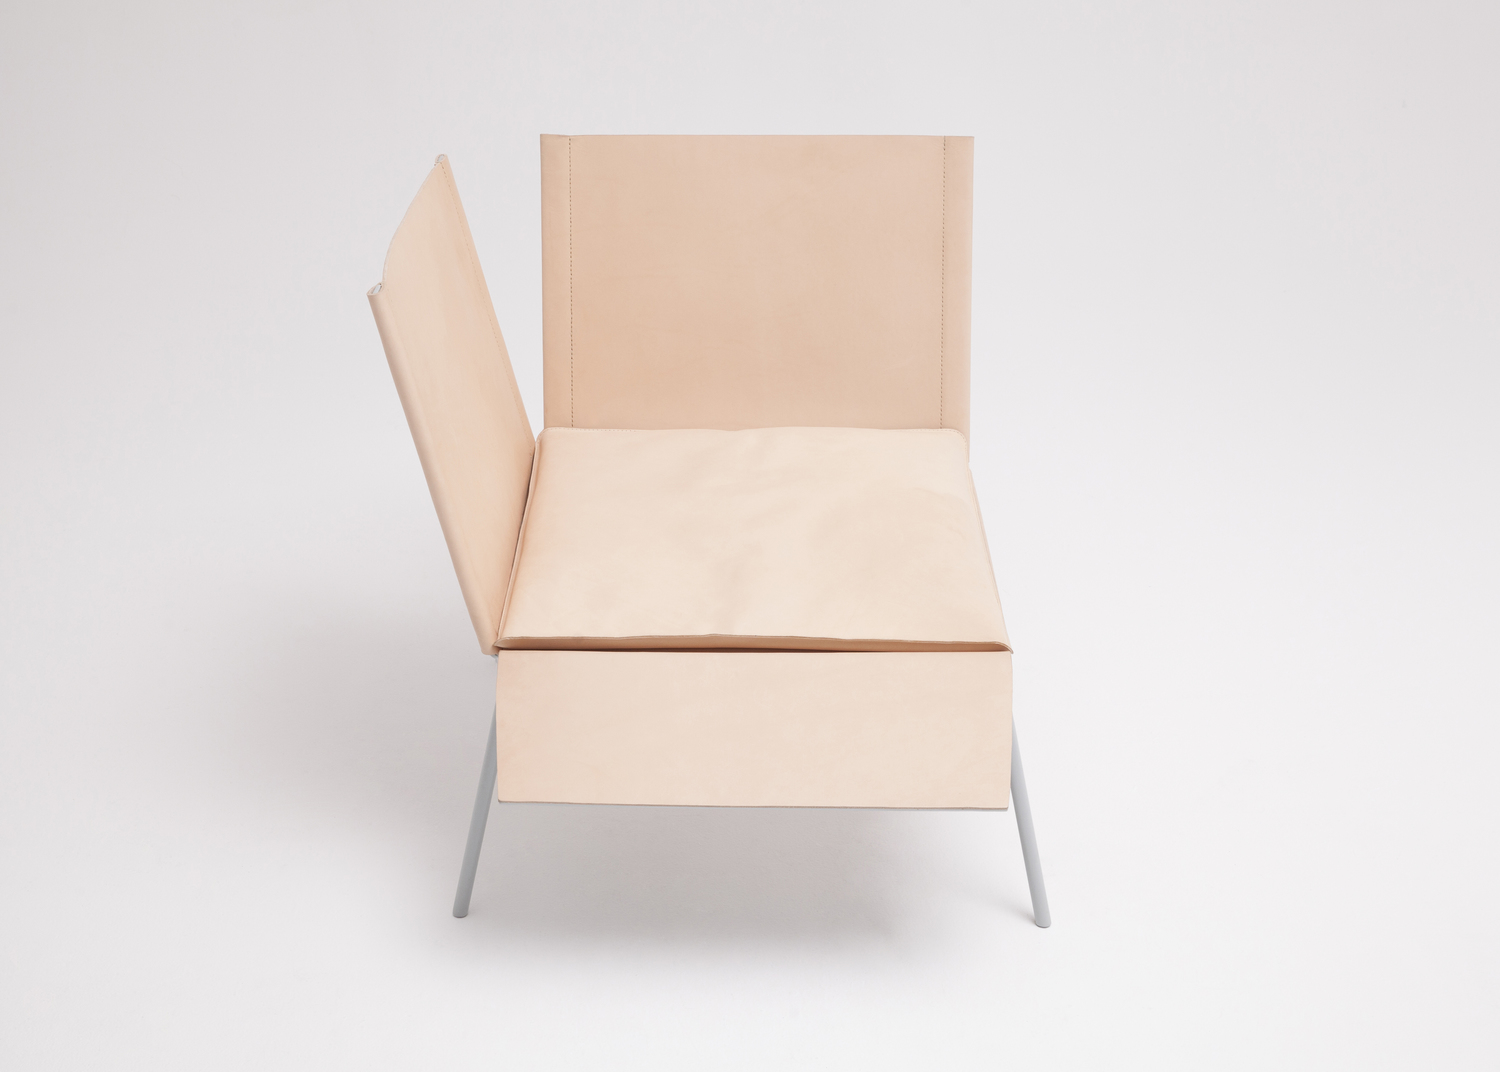 Saddle Chair by Thom Fougere